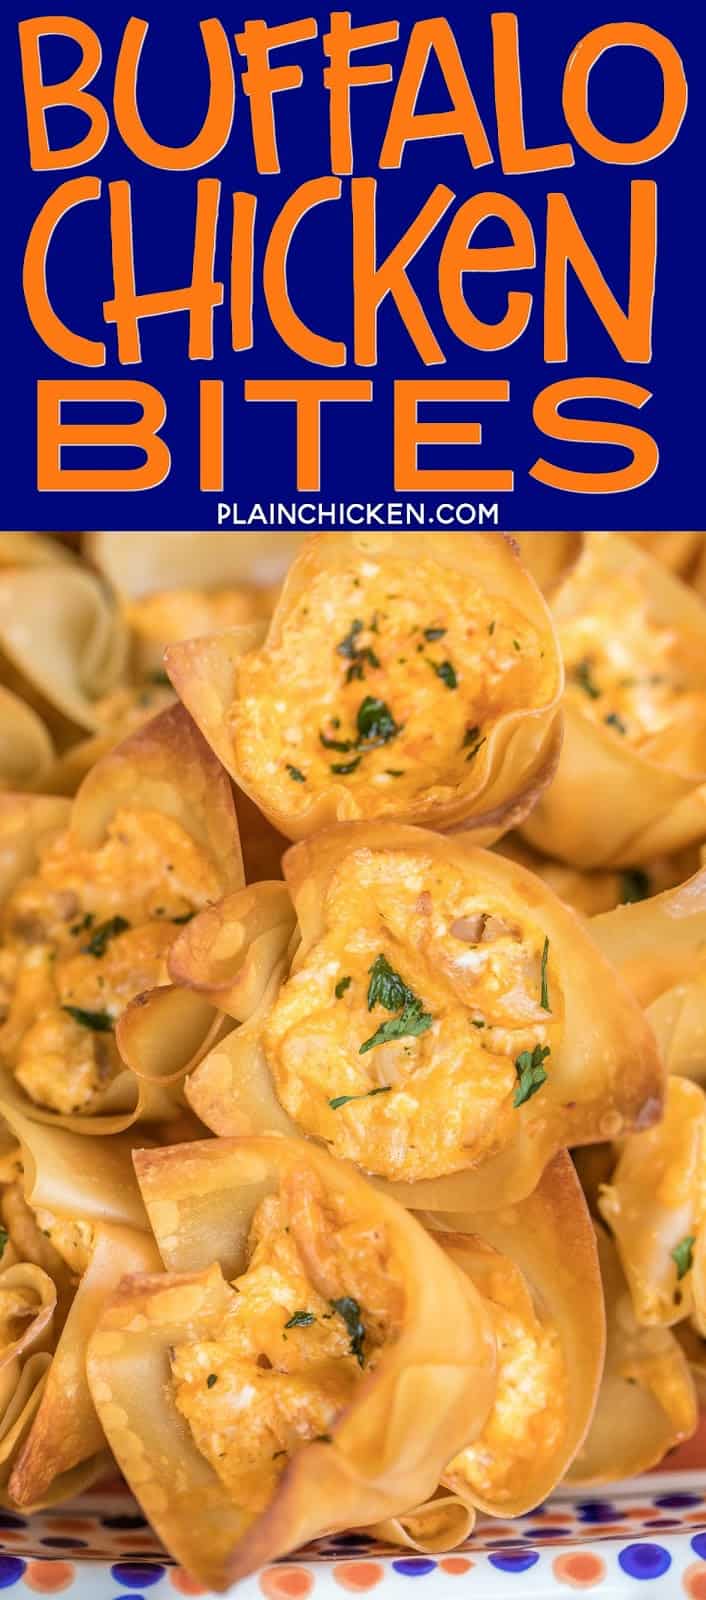 Buffalo Chicken Bites - creamy buffalo chicken dip baked in wonton wrappers. PERFECT for parties and tailgating!! I love these bite-sized appetizers!! Can adjust hot sauce to make the dip fit your tastes. Everyone RAVES about this yummy appetizer recipe! Always gone in a flash!